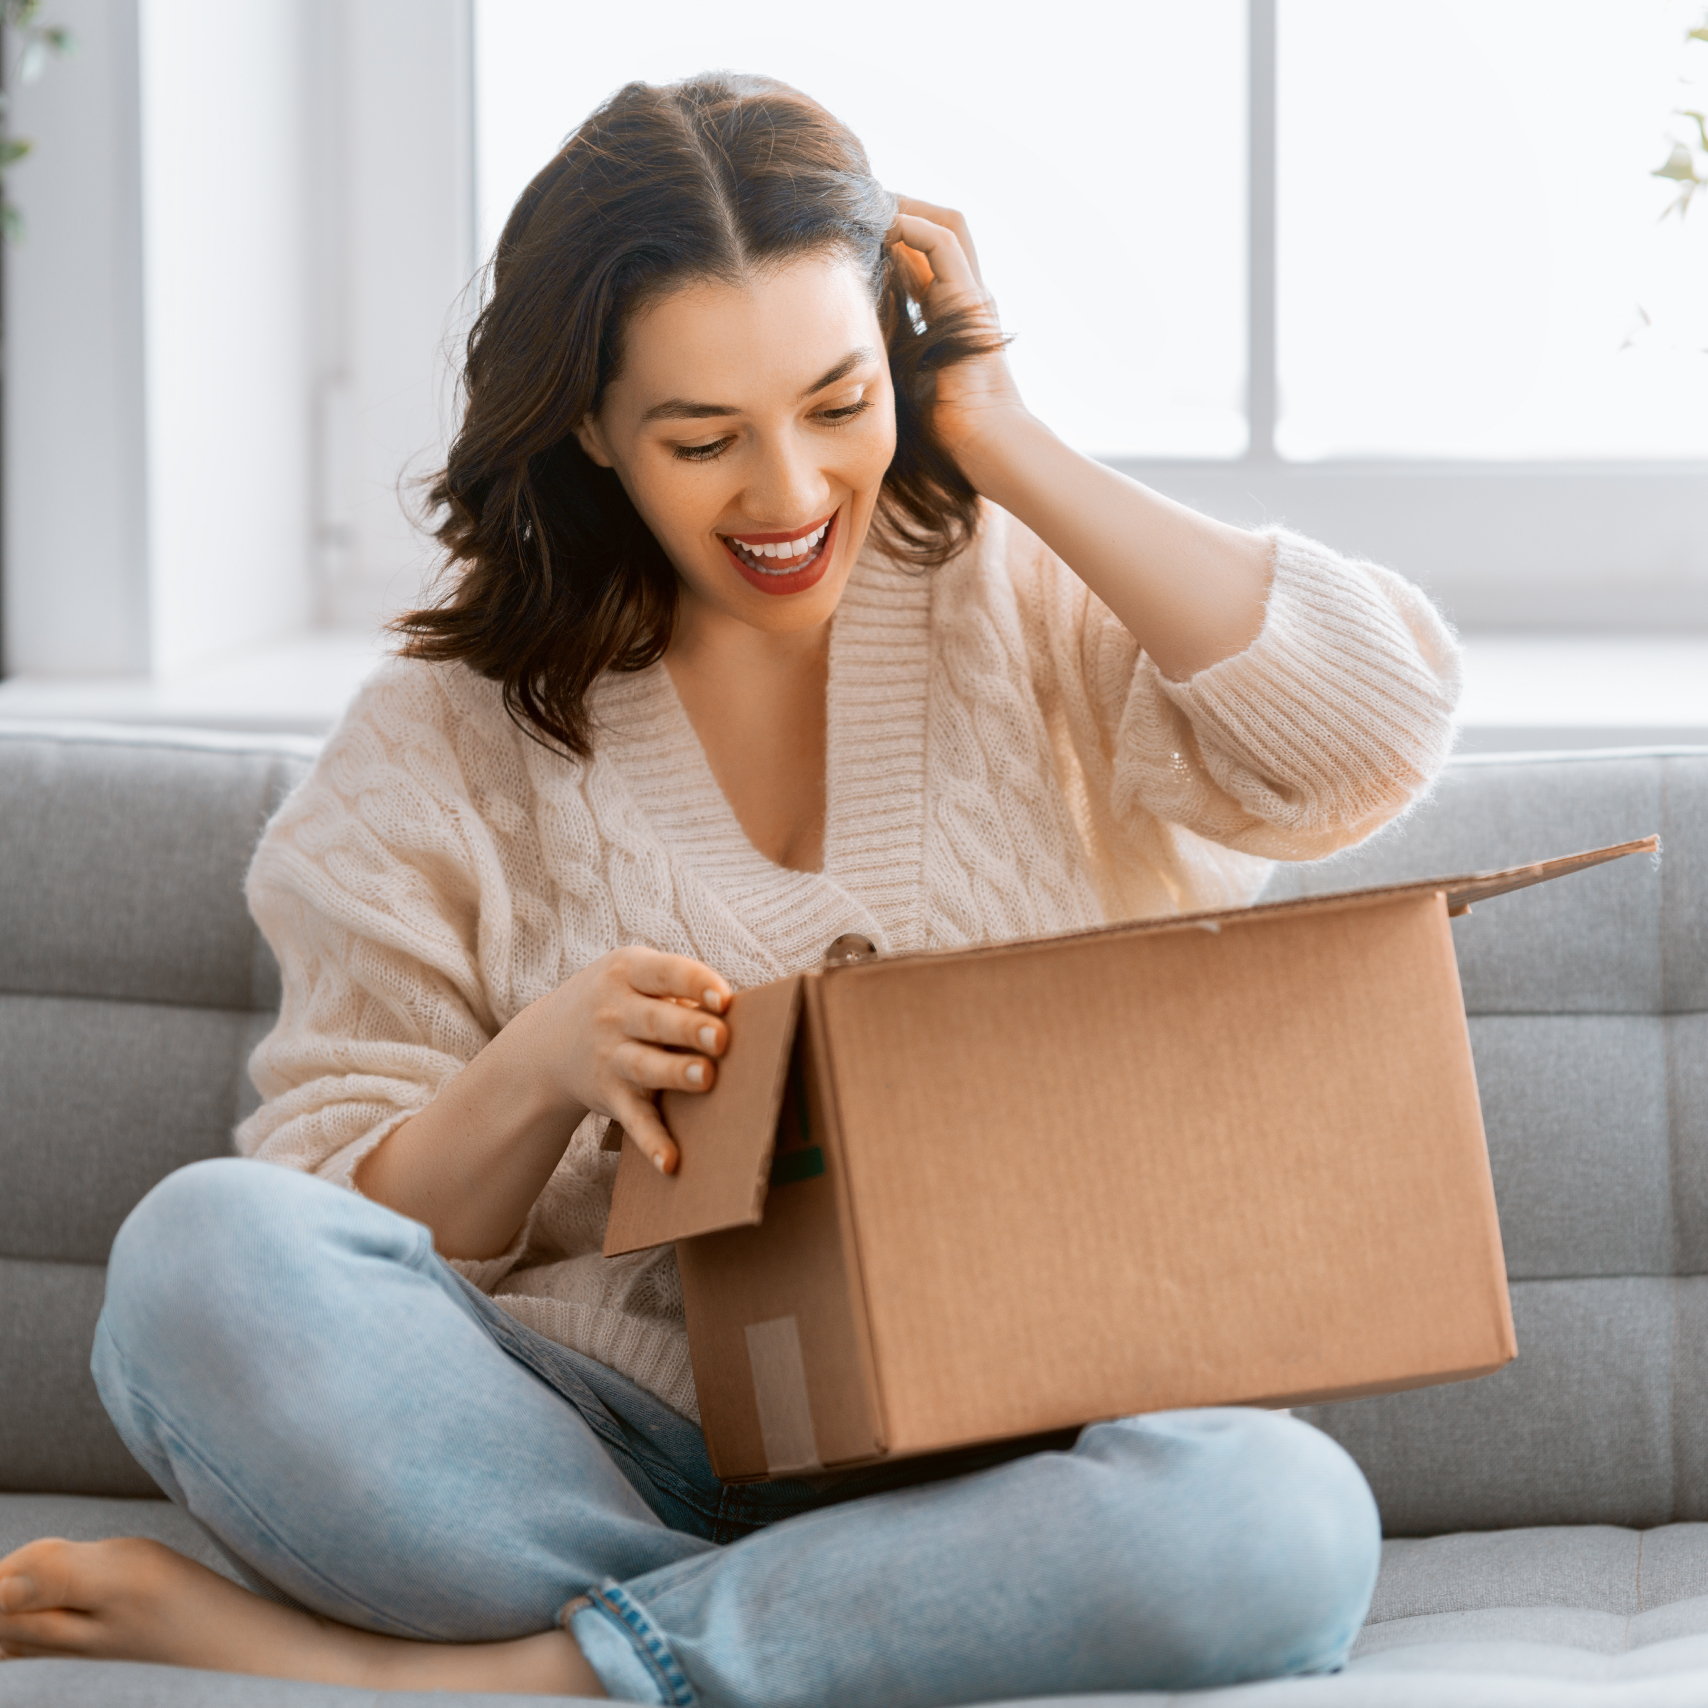 woman opening a parcel happily